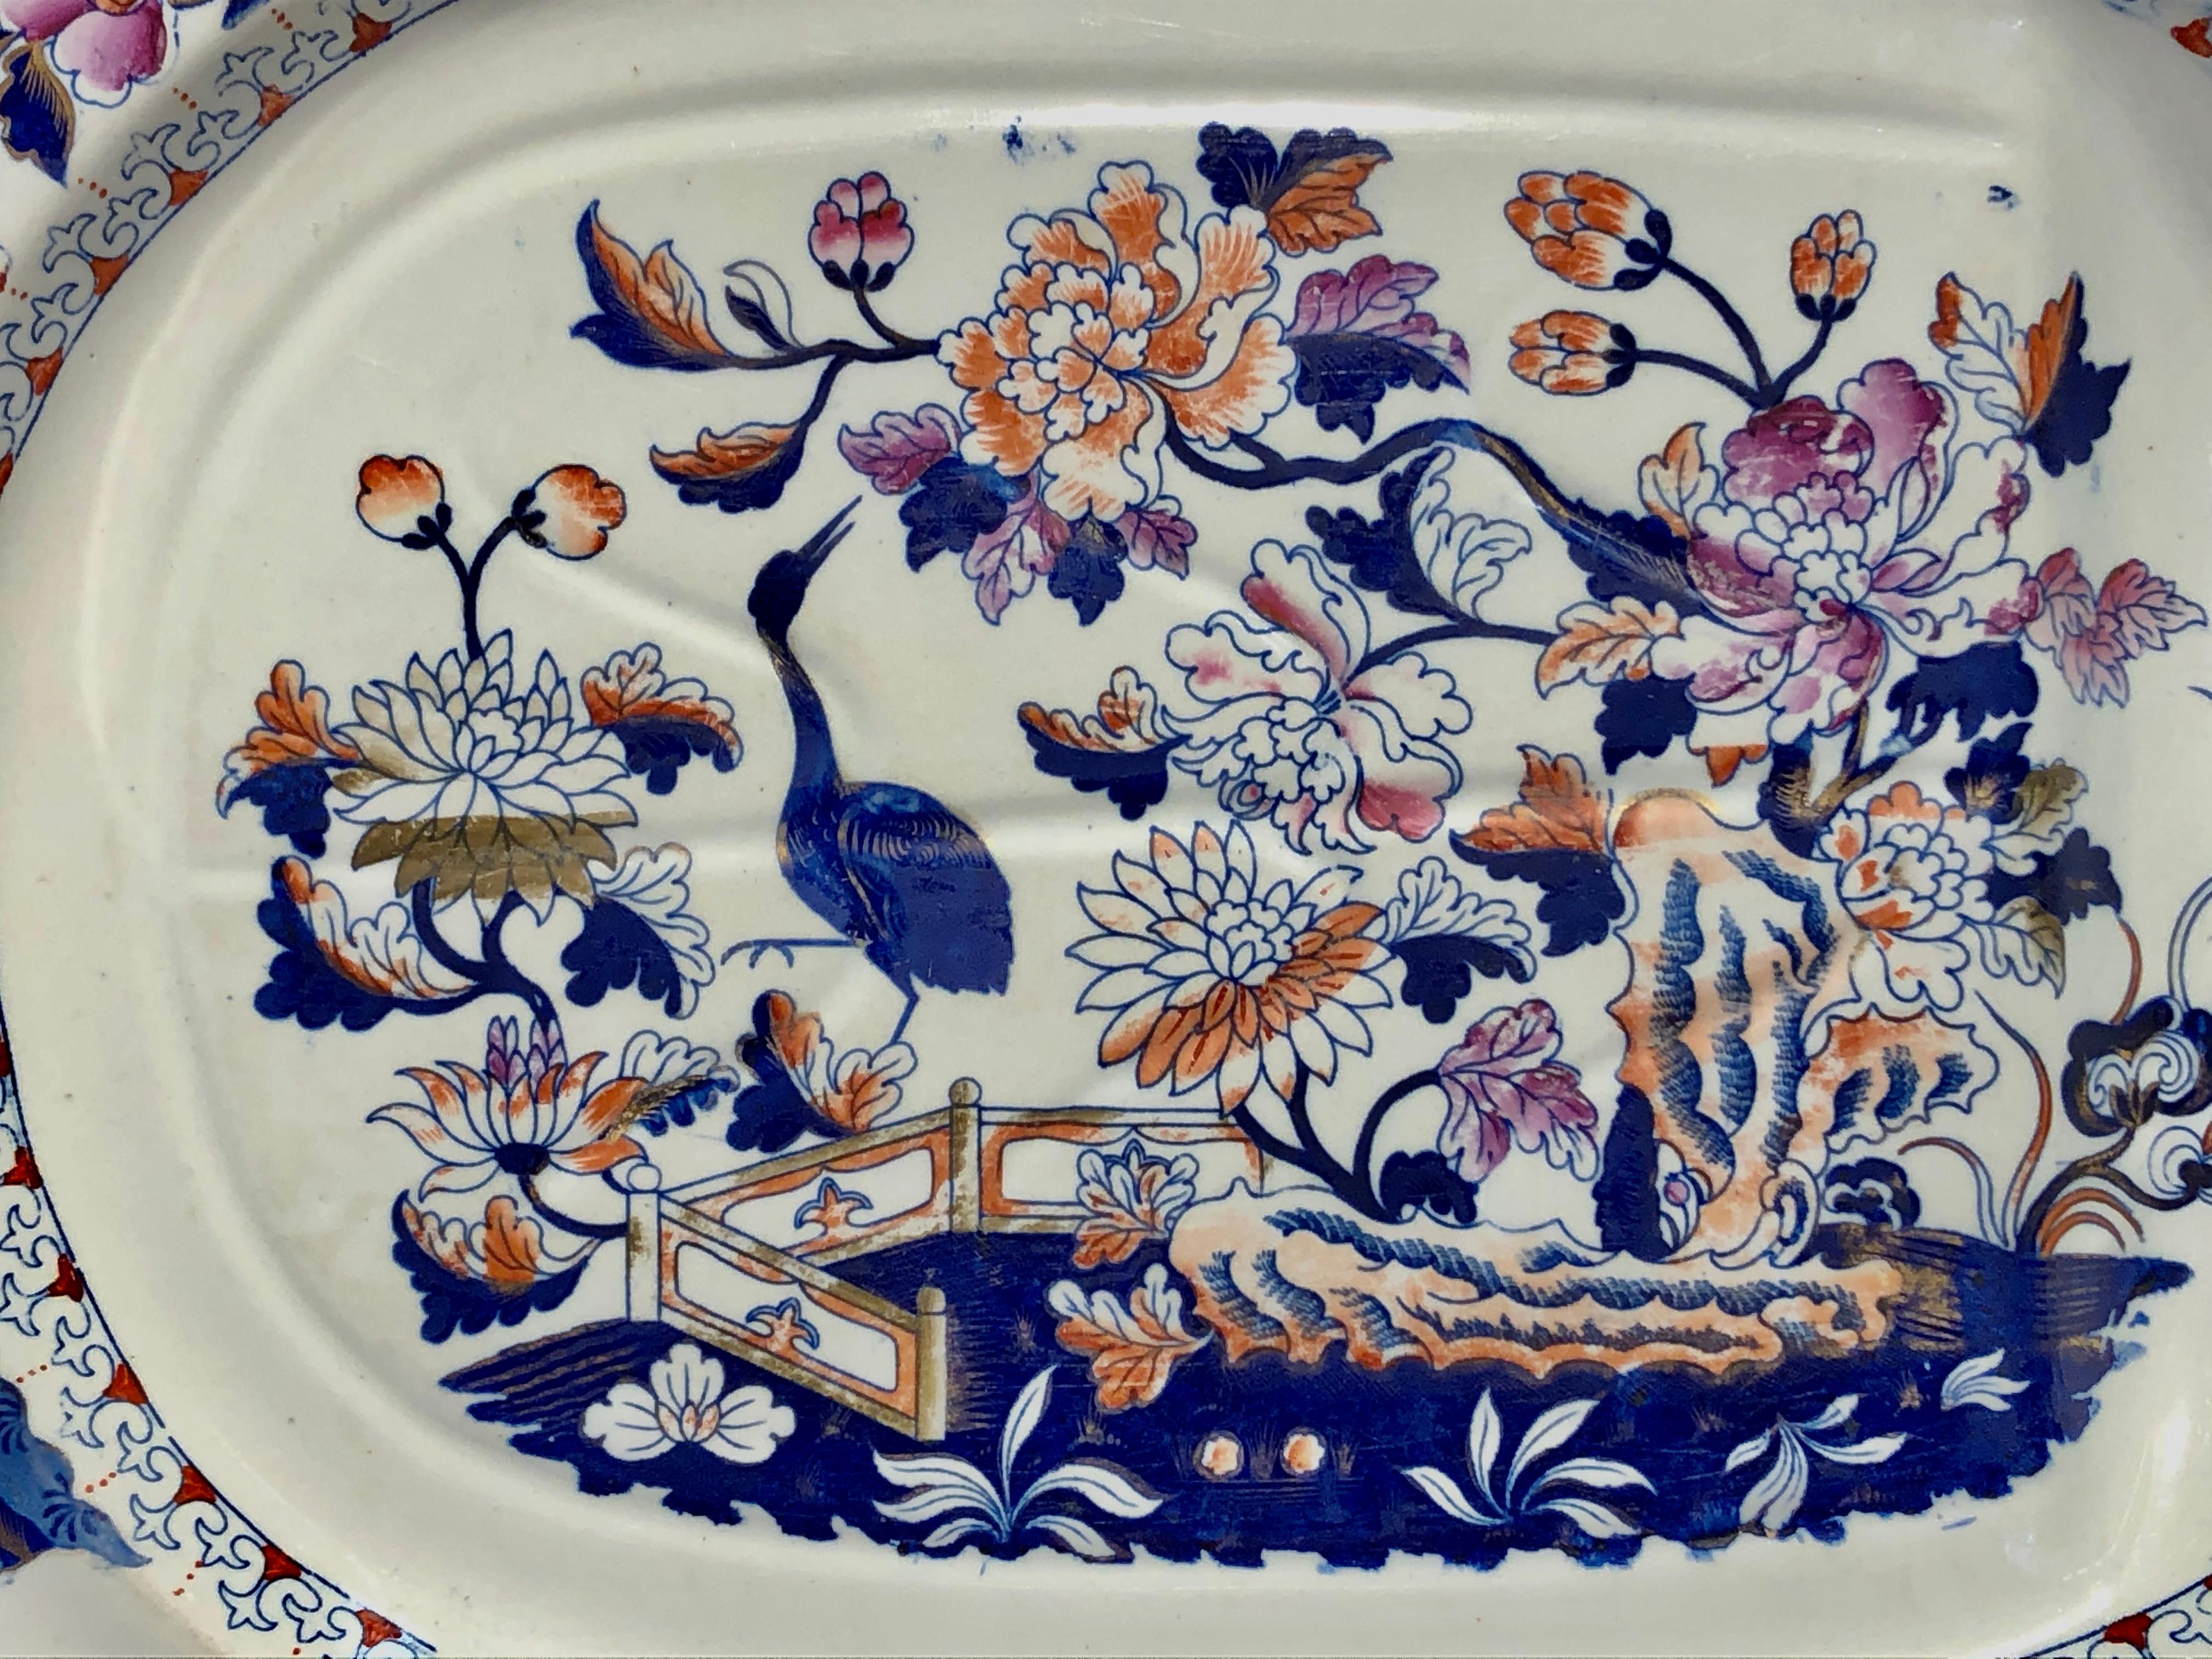 Magnificent and large antique English Geo. III large ironstone well and tree platter with gorgeous
Hand painted imari decor bird and floral design.
With very rare impressed maker's marks for Raplh & James Clews, Cobridge-Staffordshire
This